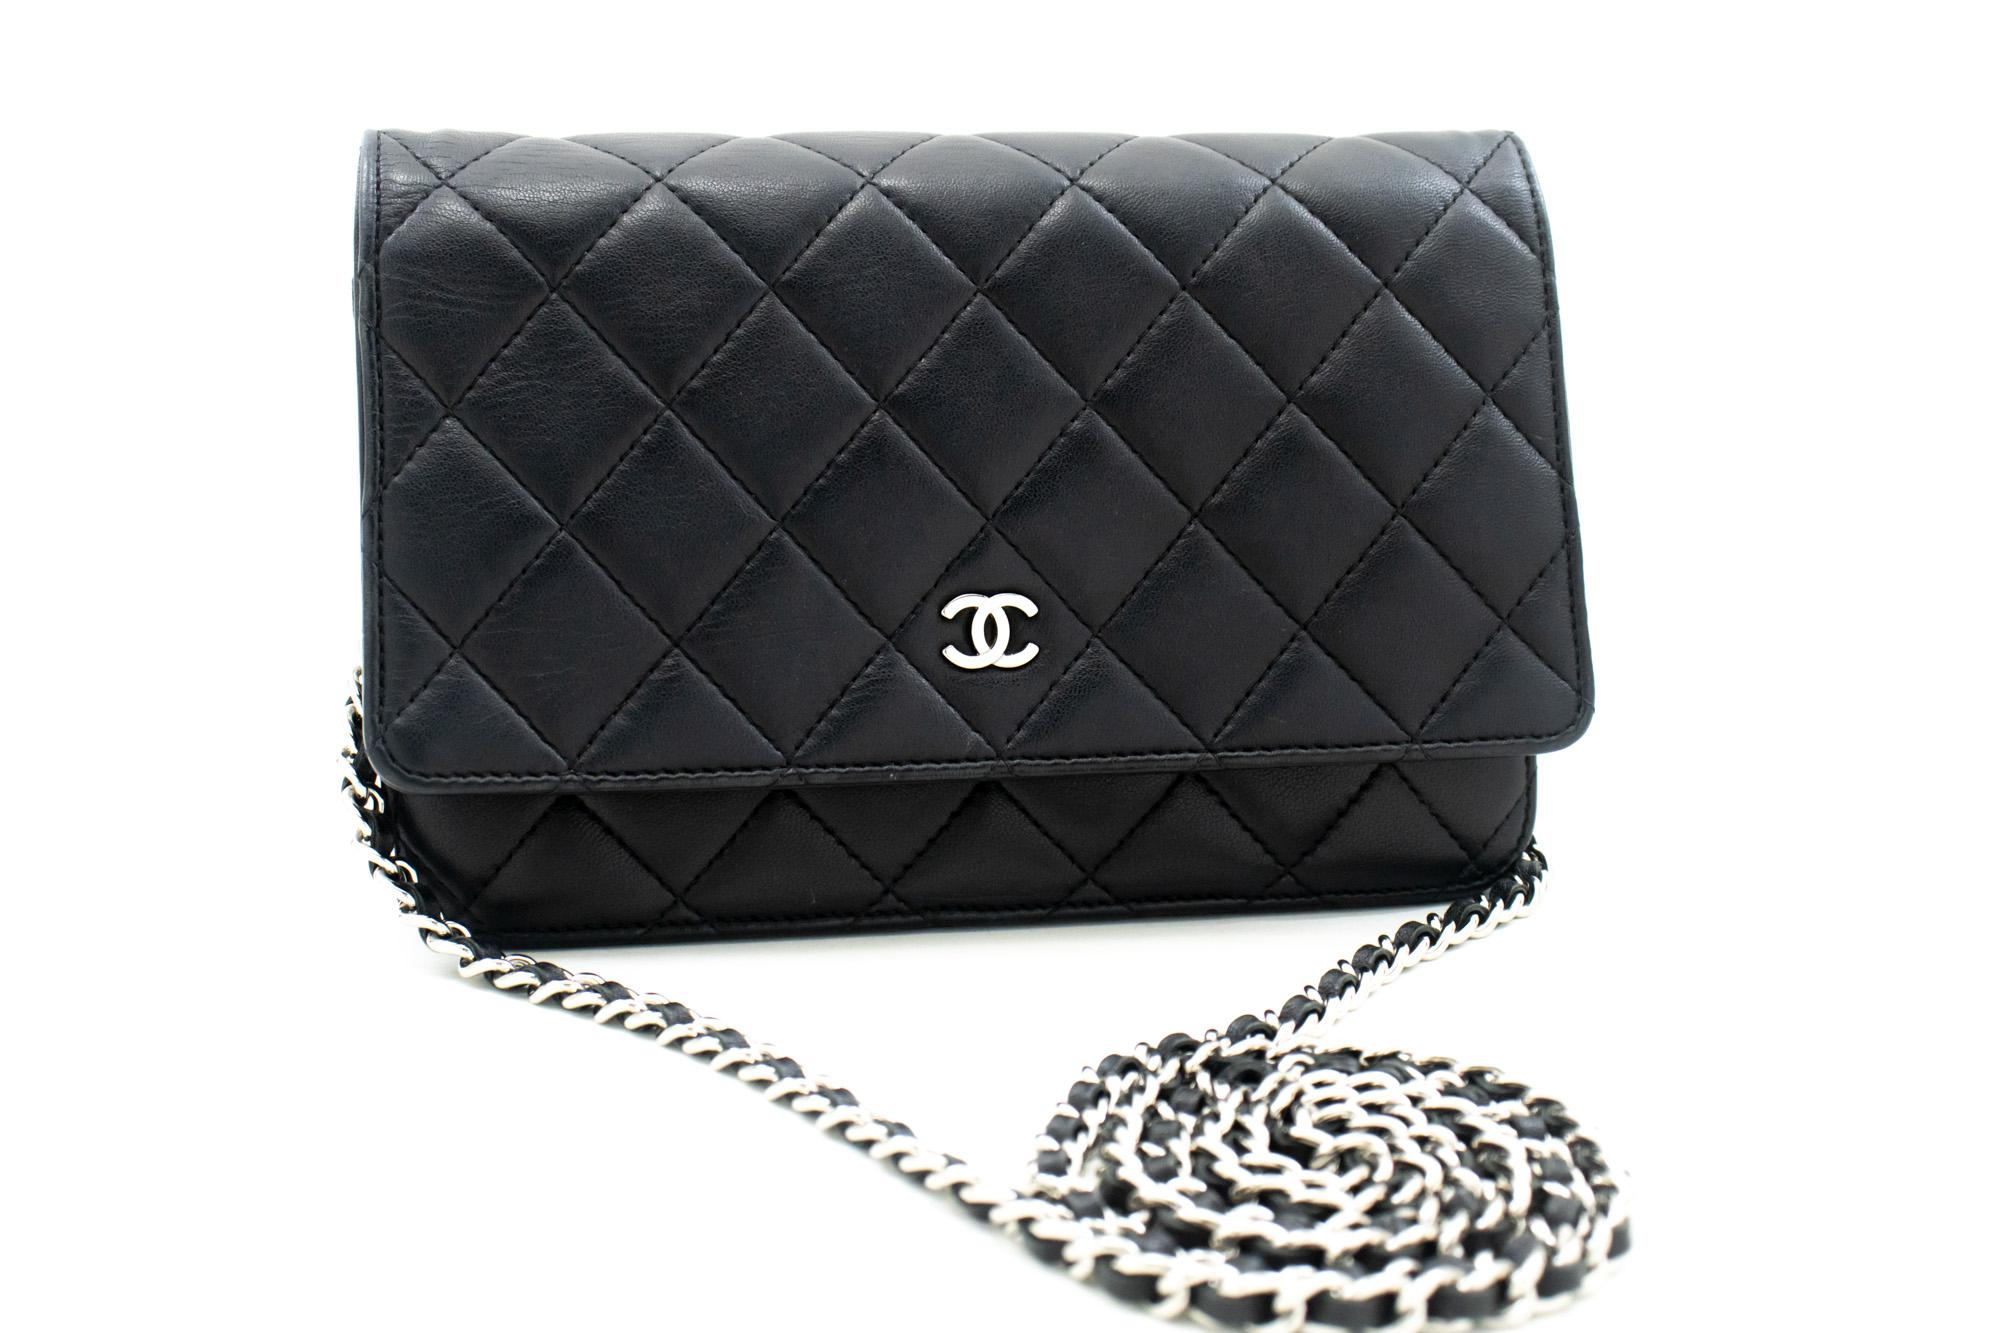 An authentic CHANEL Black Classic Wallet On Chain WOC Shoulder Bag made of black Lambskin Silver. The color is Black. The outside material is Leather. The pattern is Solid. This item is Contemporary. The year of manufacture would be 2010.
Conditions